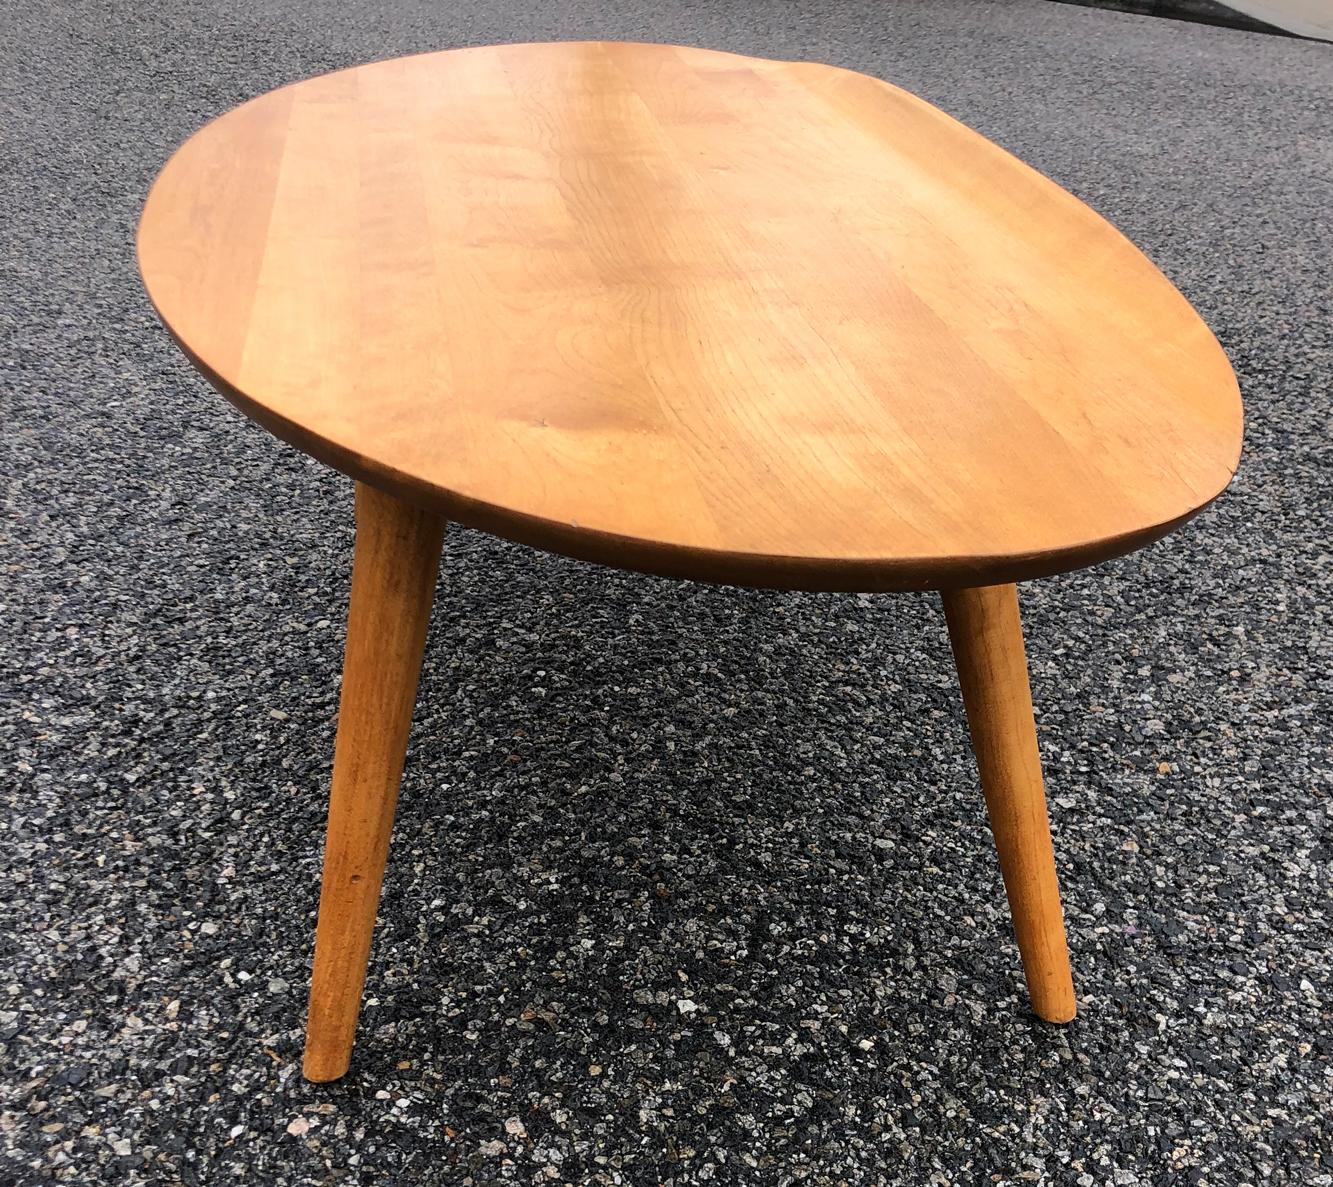 18th Century Surf Table, Midcentury Russel Wright Elliptical Coffee Table with Raised Edge